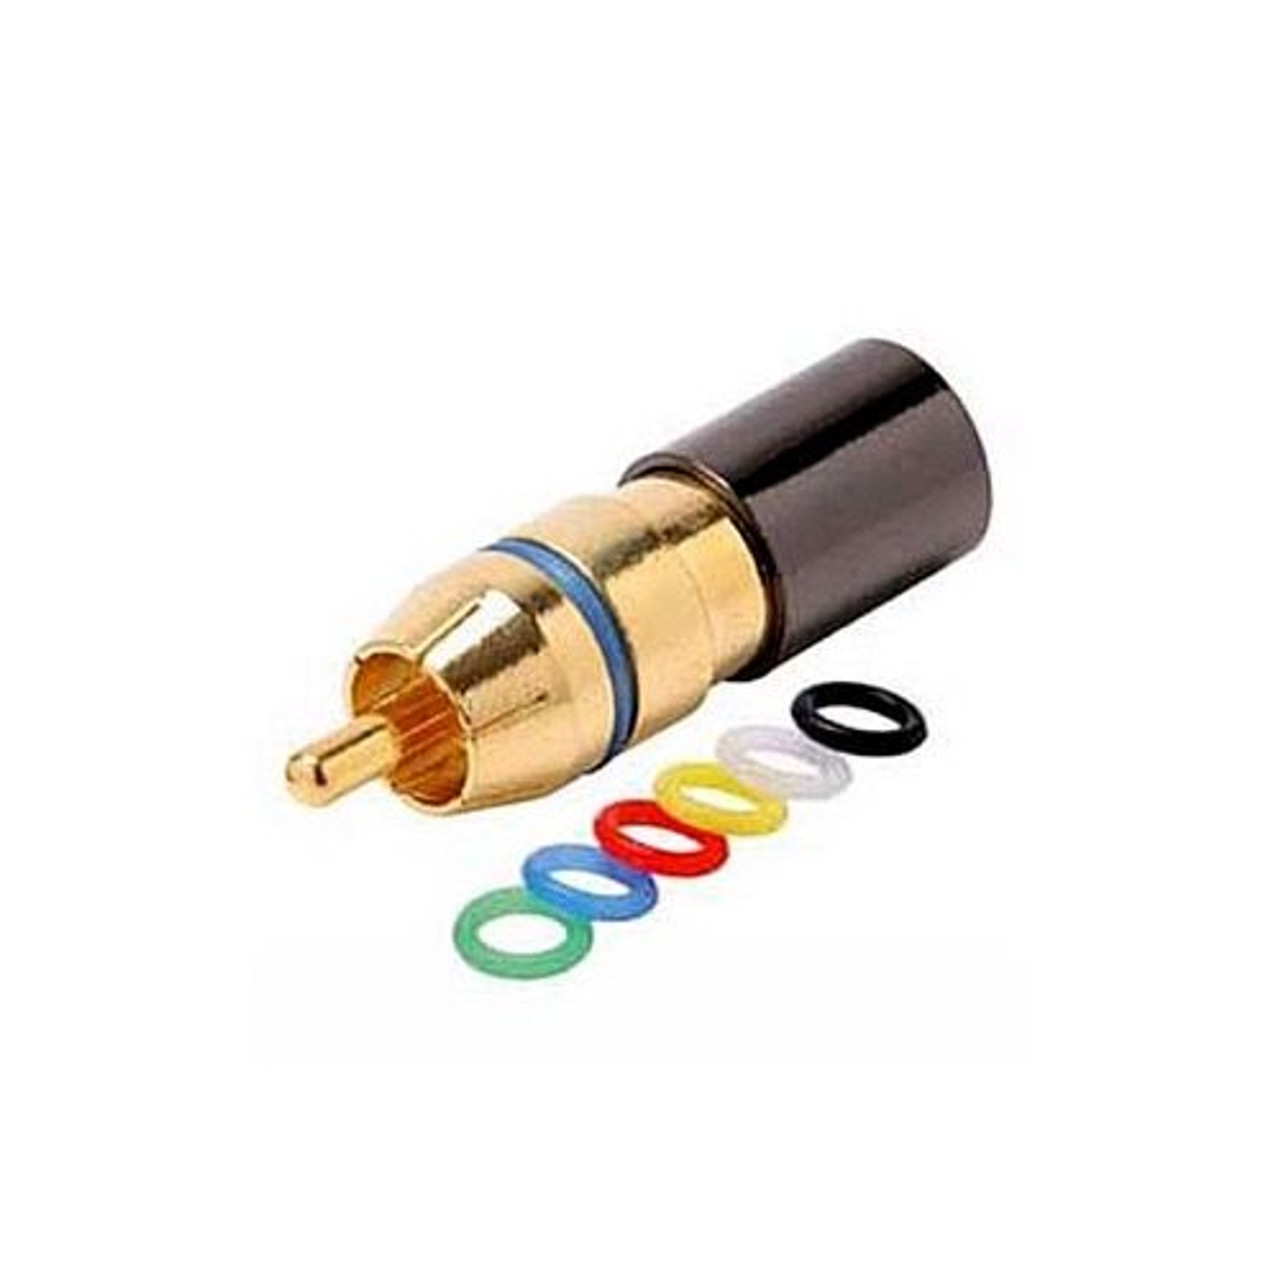 Steren 200-087 RCA Compression Connector Quad Shield RG6 with 6 Color Coded Bands Gold Plated Permaseal II RG-6 Female to RCA Male Plug Adapter, RF Digital Commercial Audio Video Component, Part # 200087